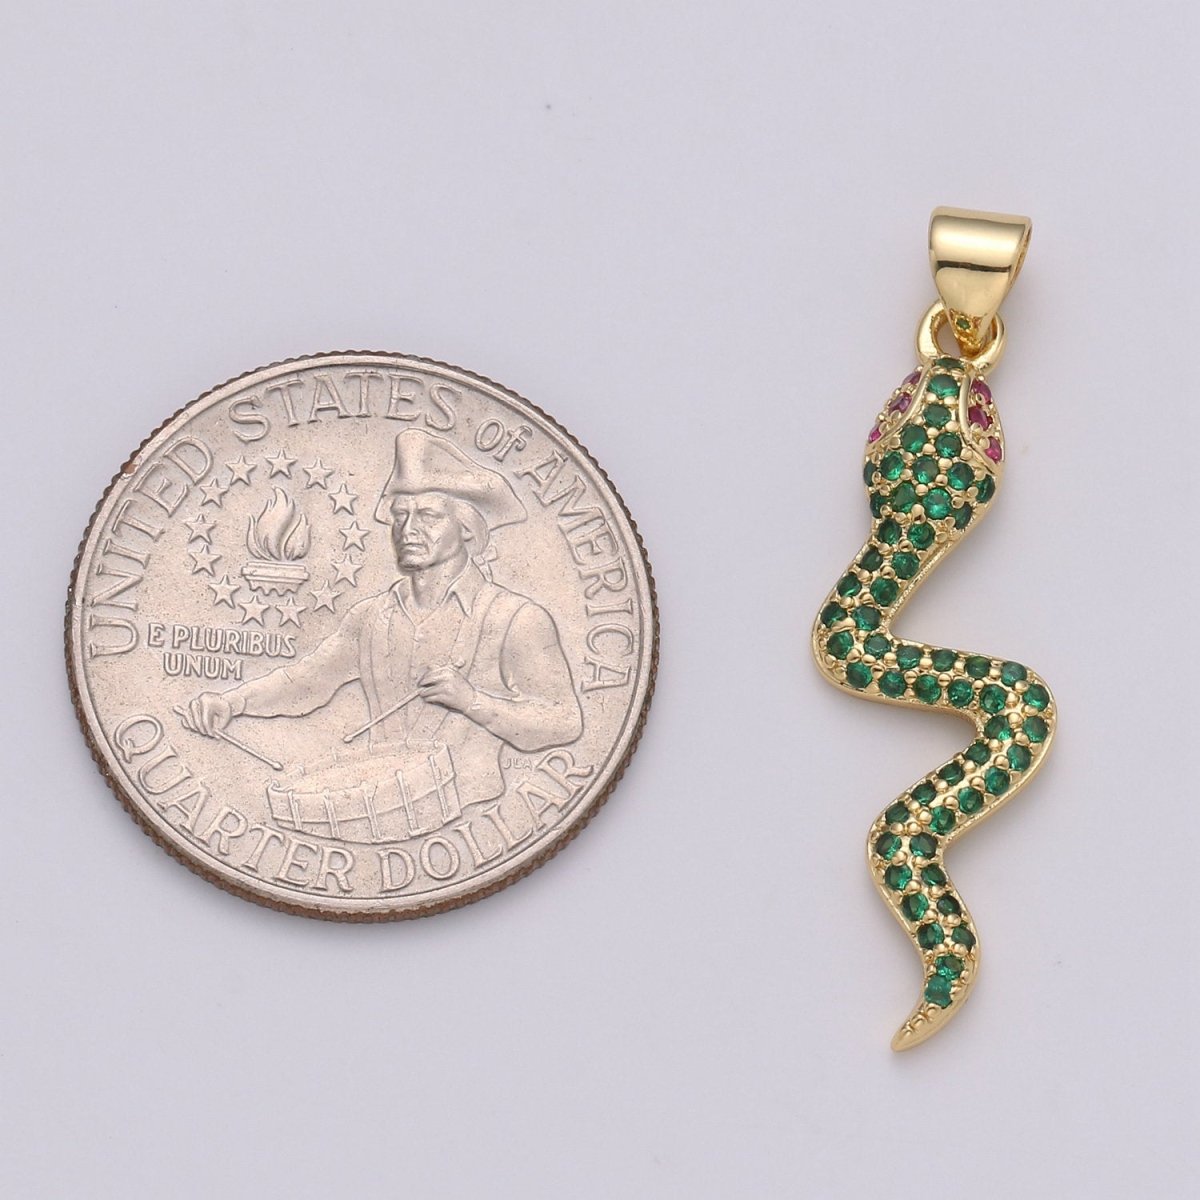 Micro Pave Gold Snake Charm Pendant, Cubic Snake Charms, Dainty Pendant Jewelry in 24K Gold Filled For Statement Necklace Earring I-809~I-811 - DLUXCA